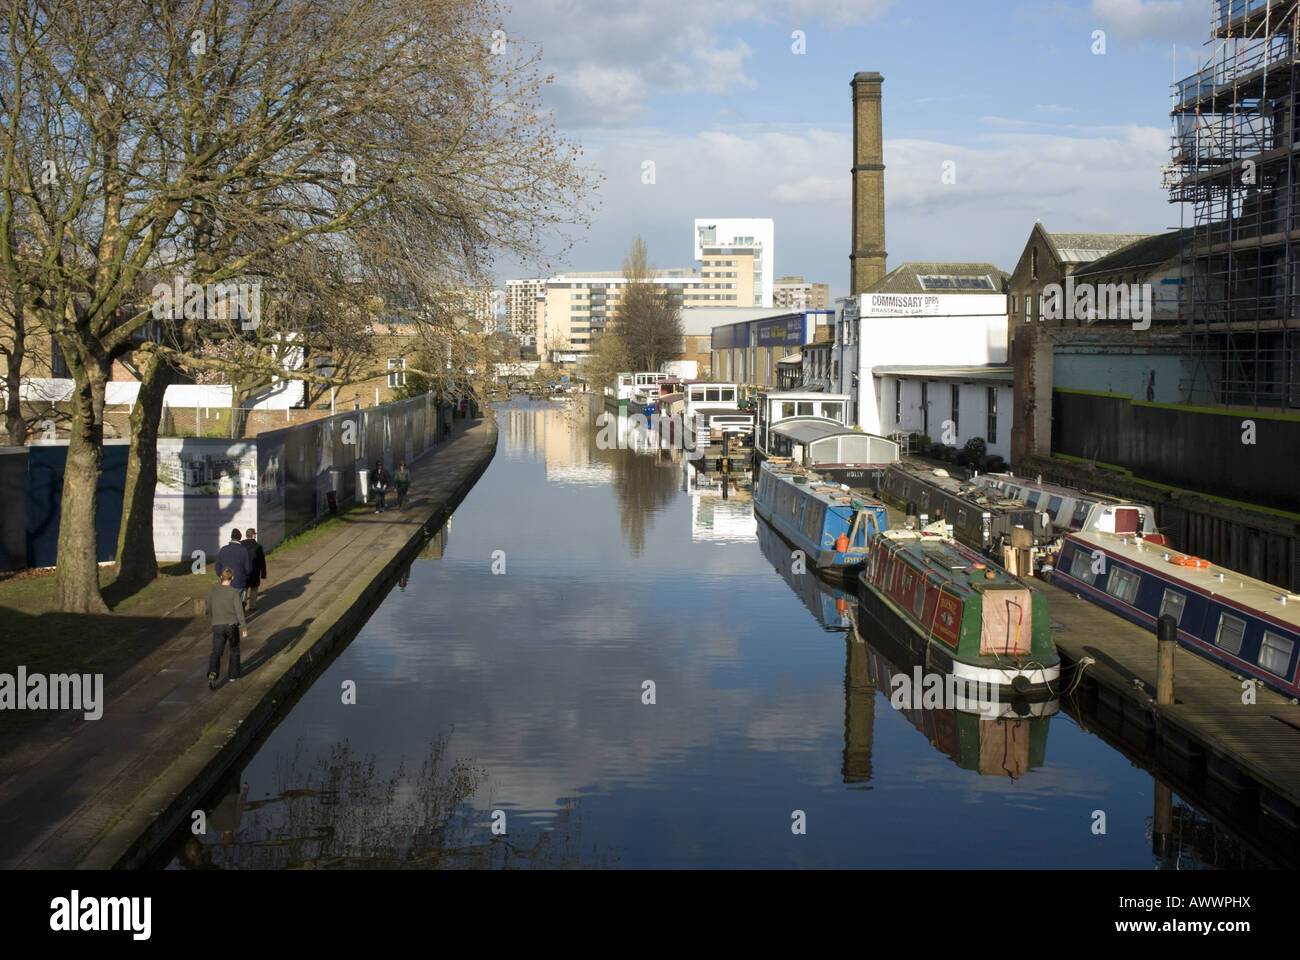 A canal in Hackney, east London, UK Stock Photo